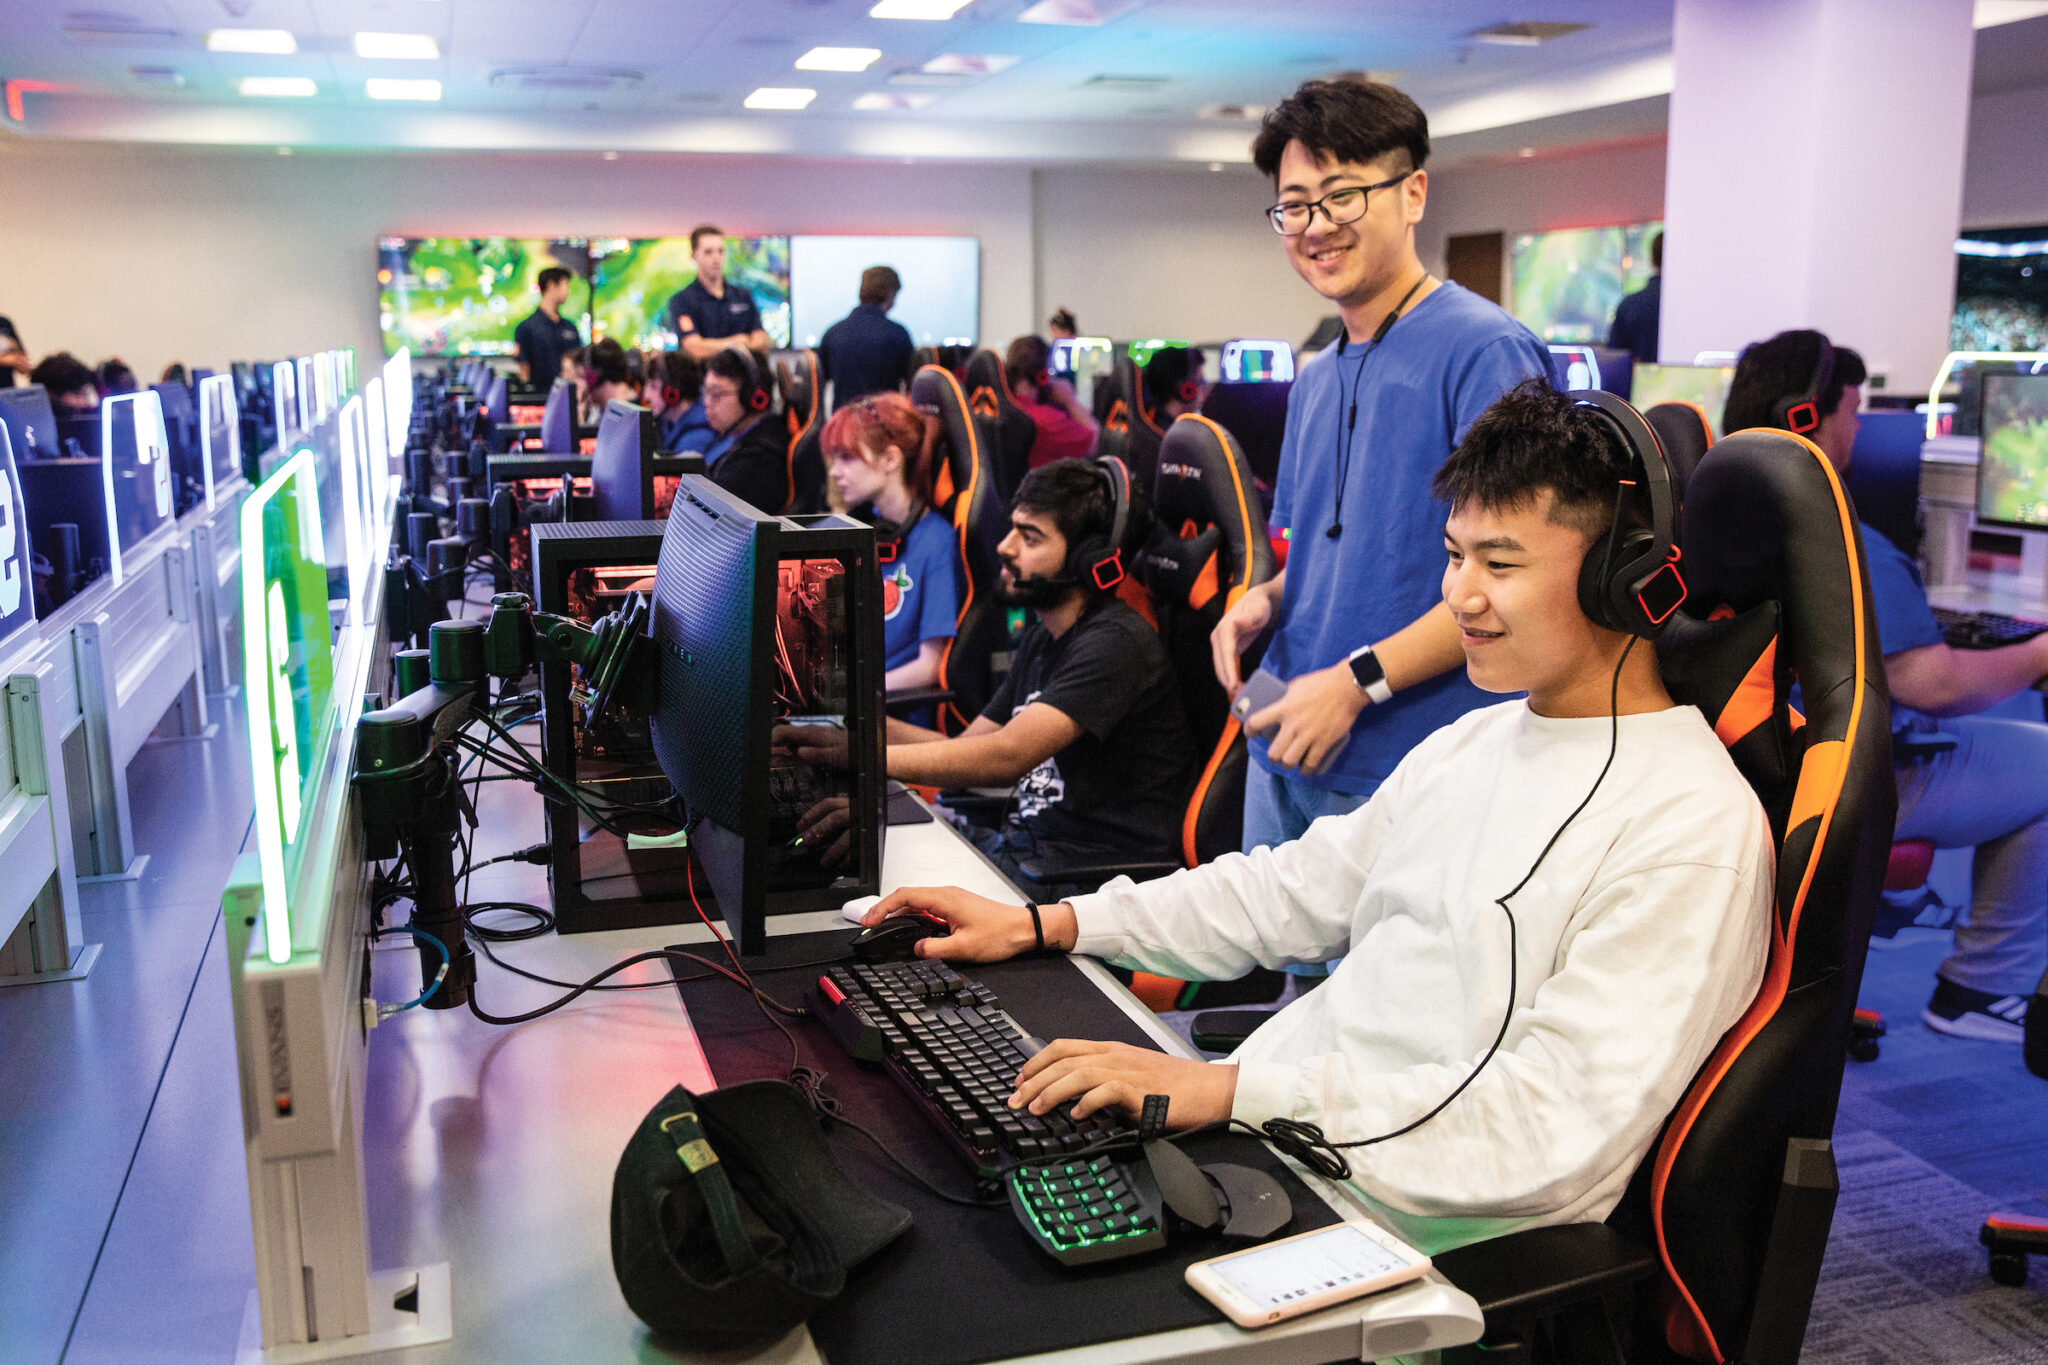 Students sit at computers in esports room playing video games